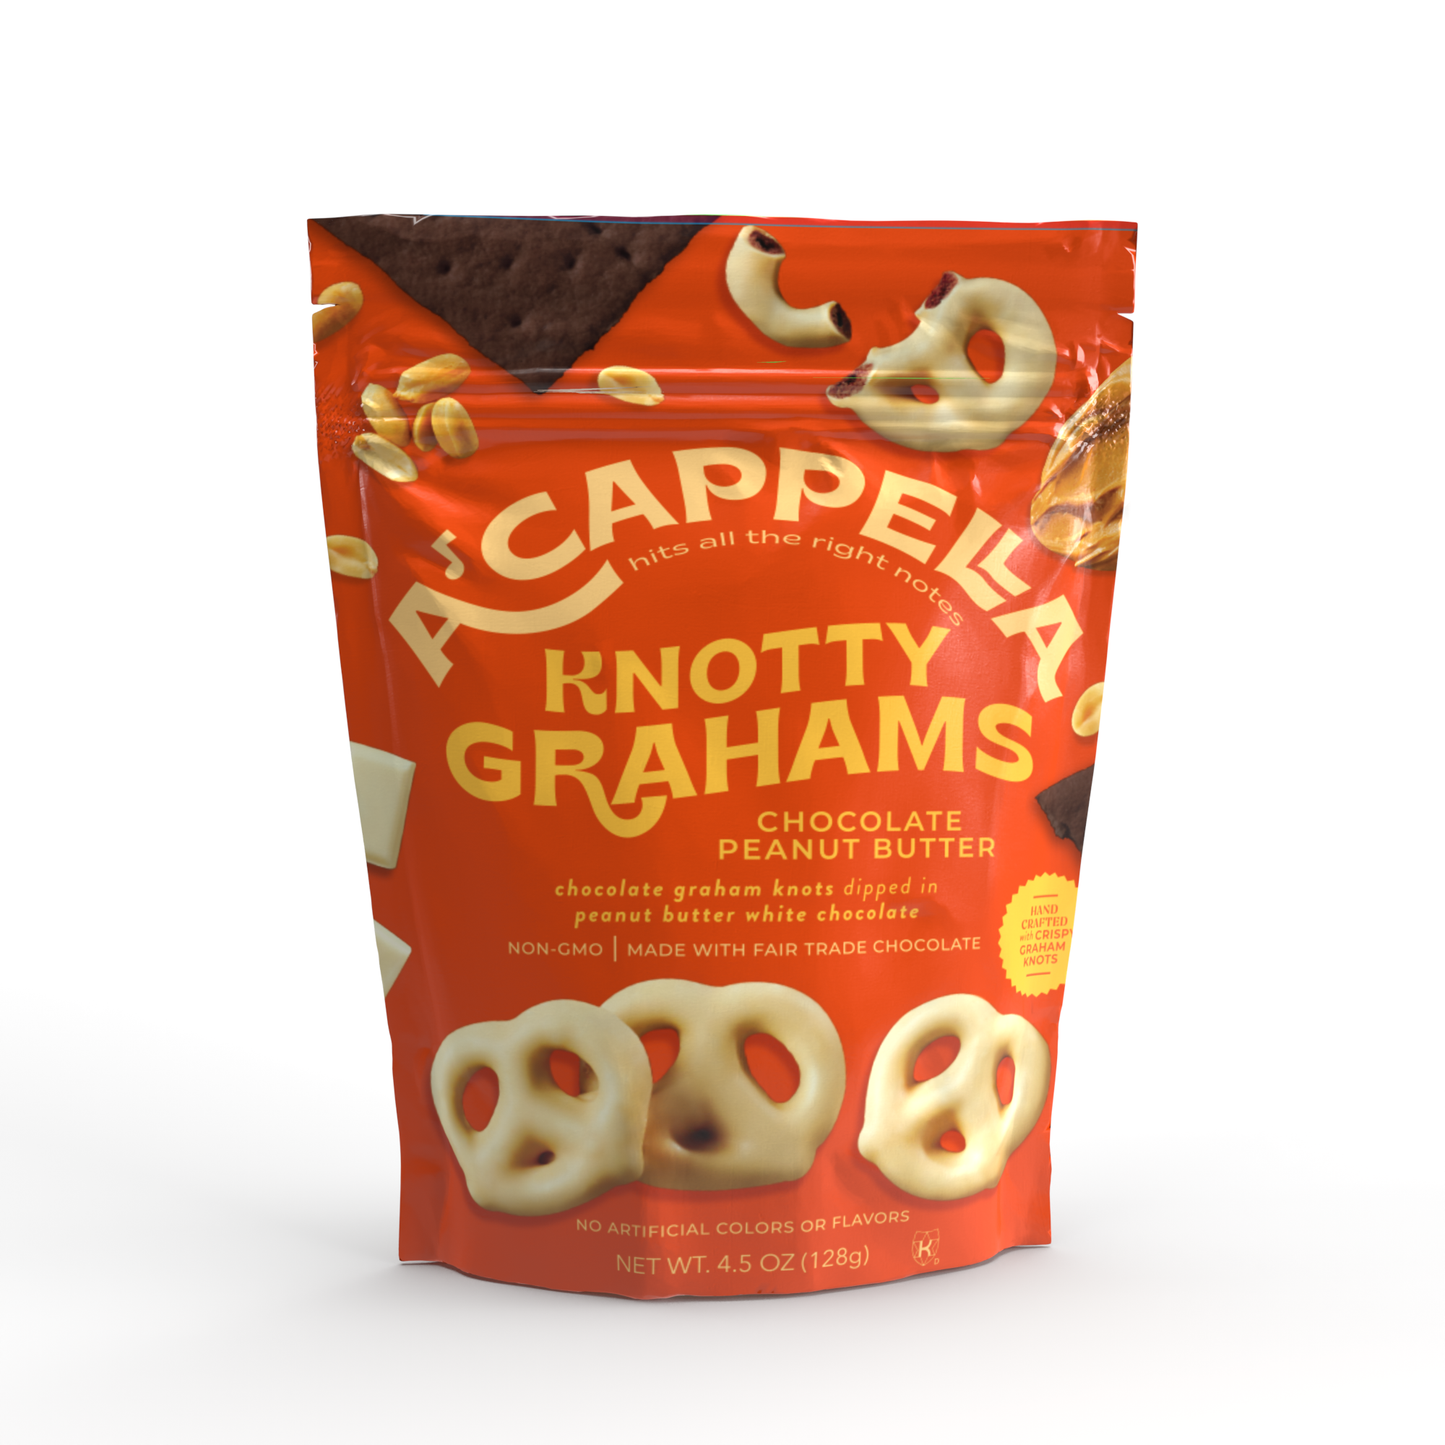 A'cappella Knotty Grahams - Chocolate Peanut Butter